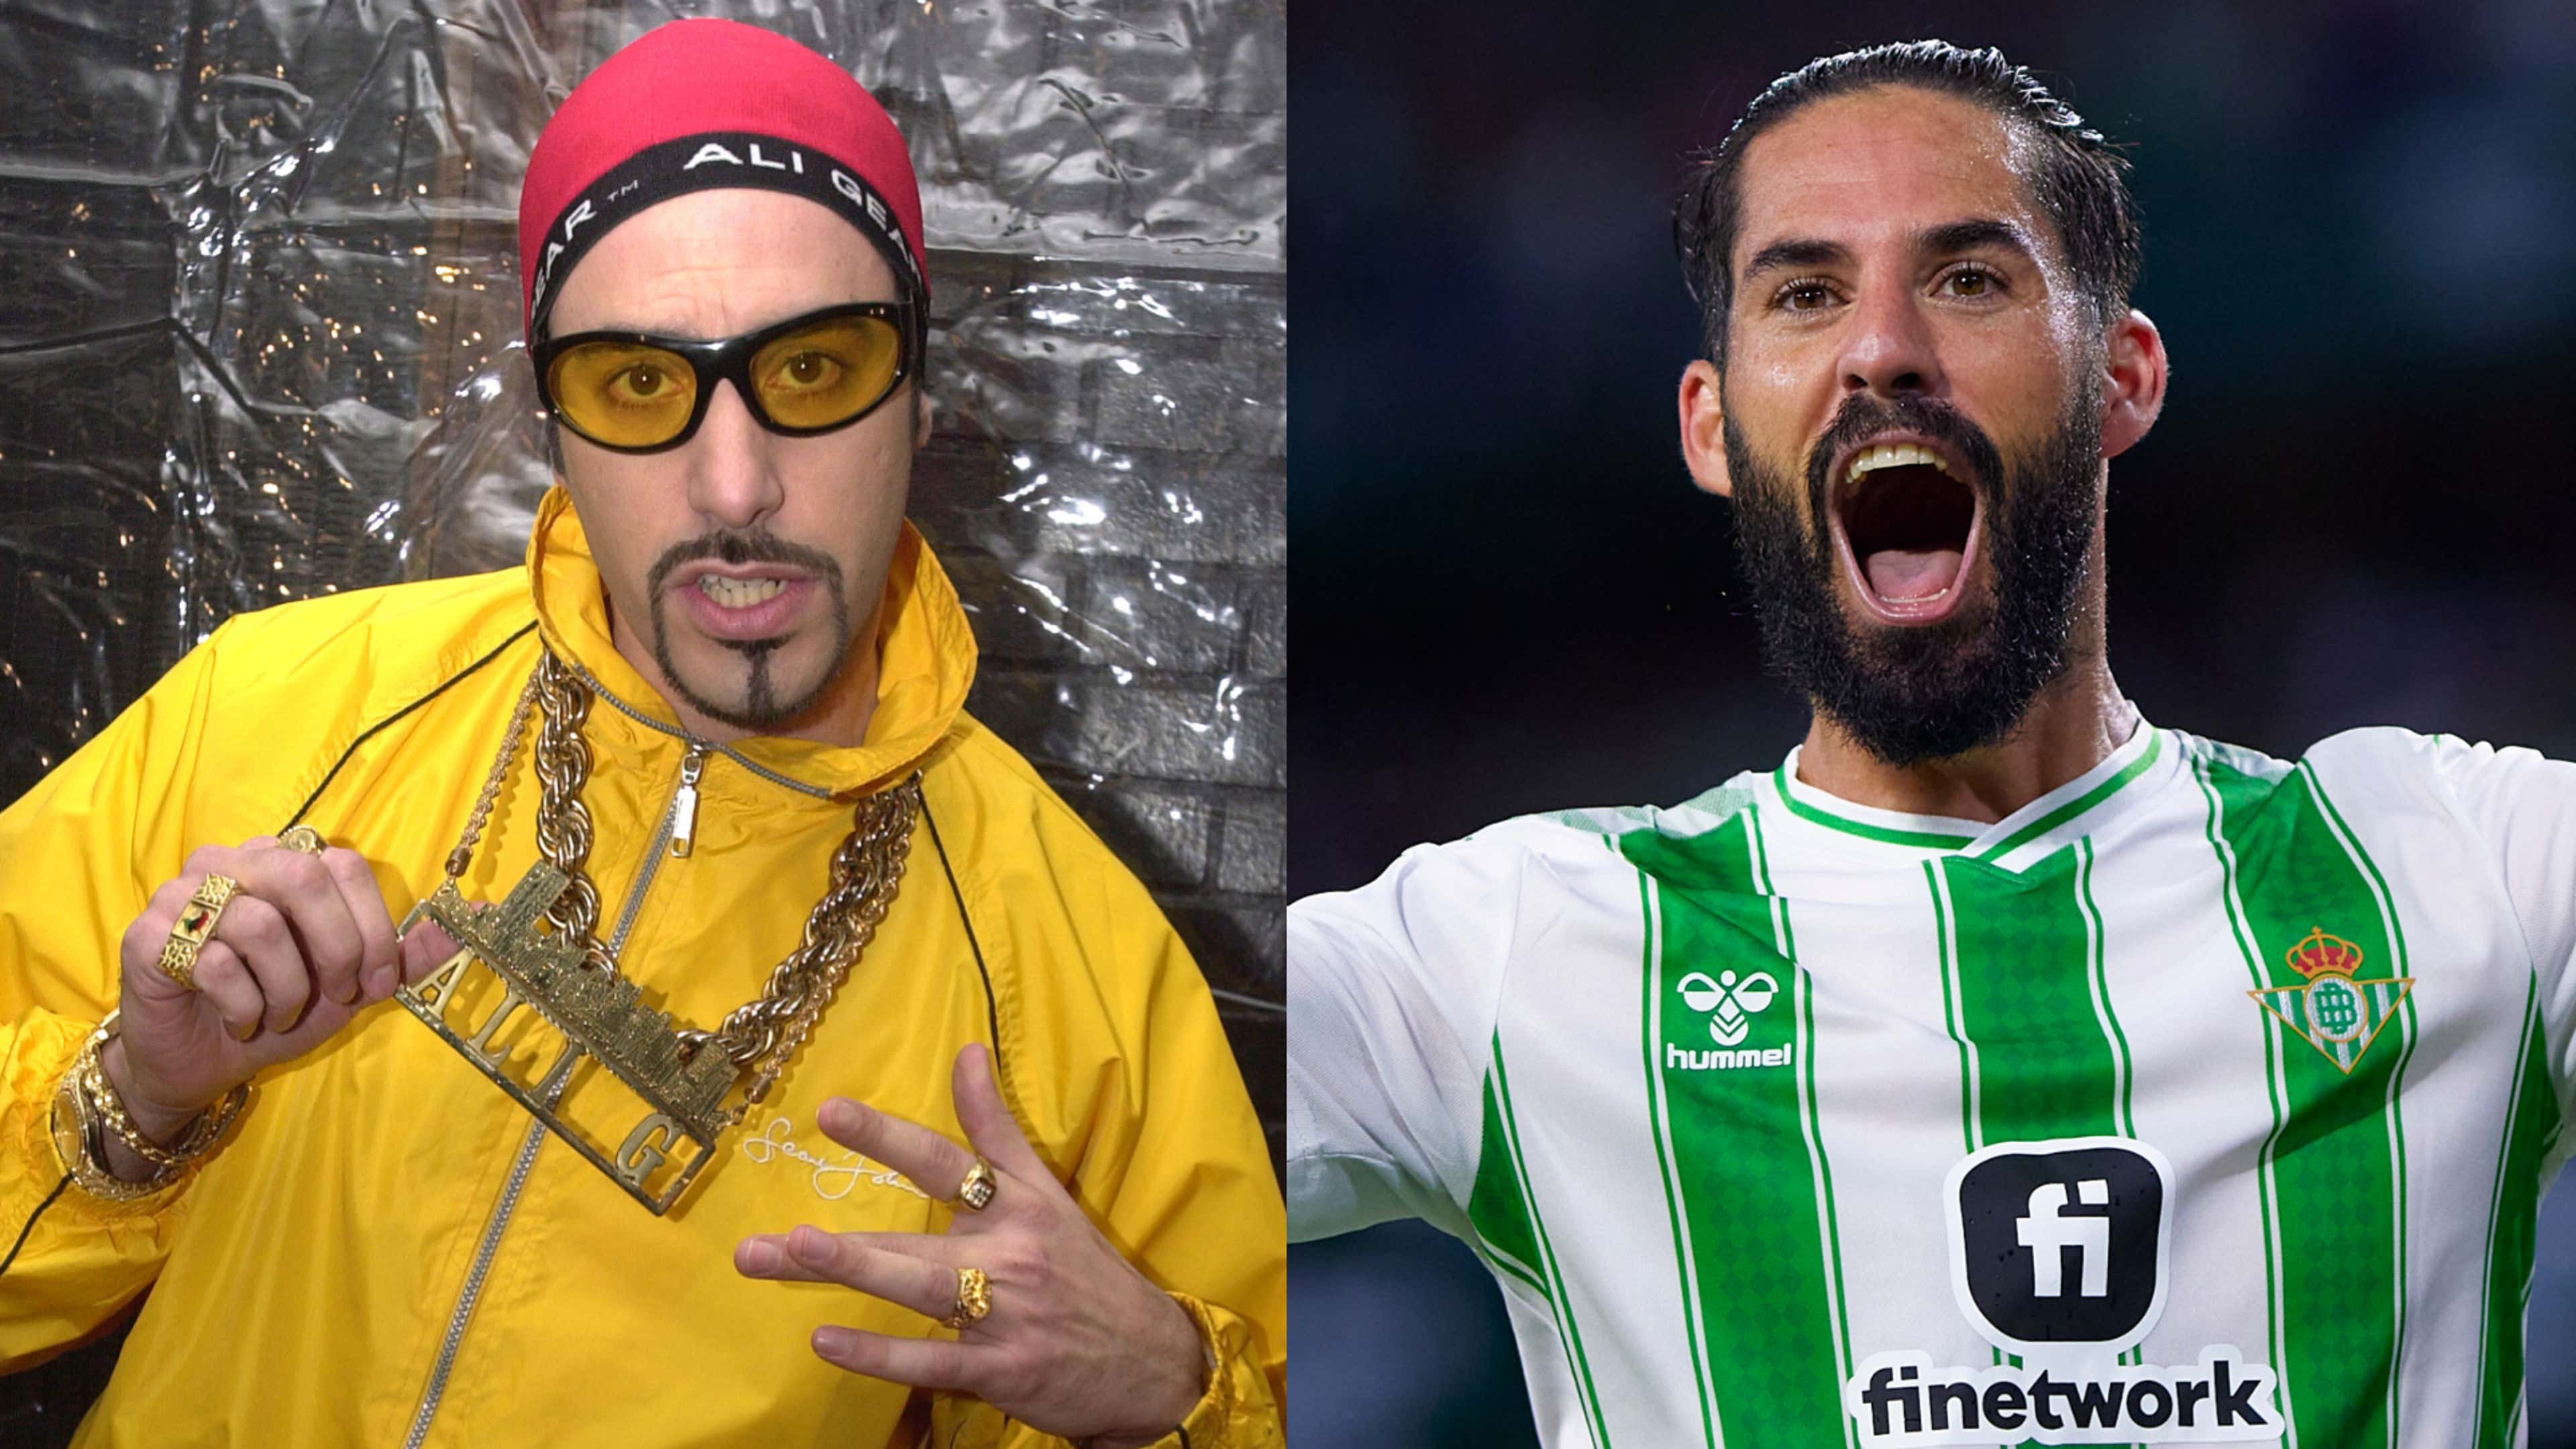 Ali G Indahouse streaming: where to watch online?